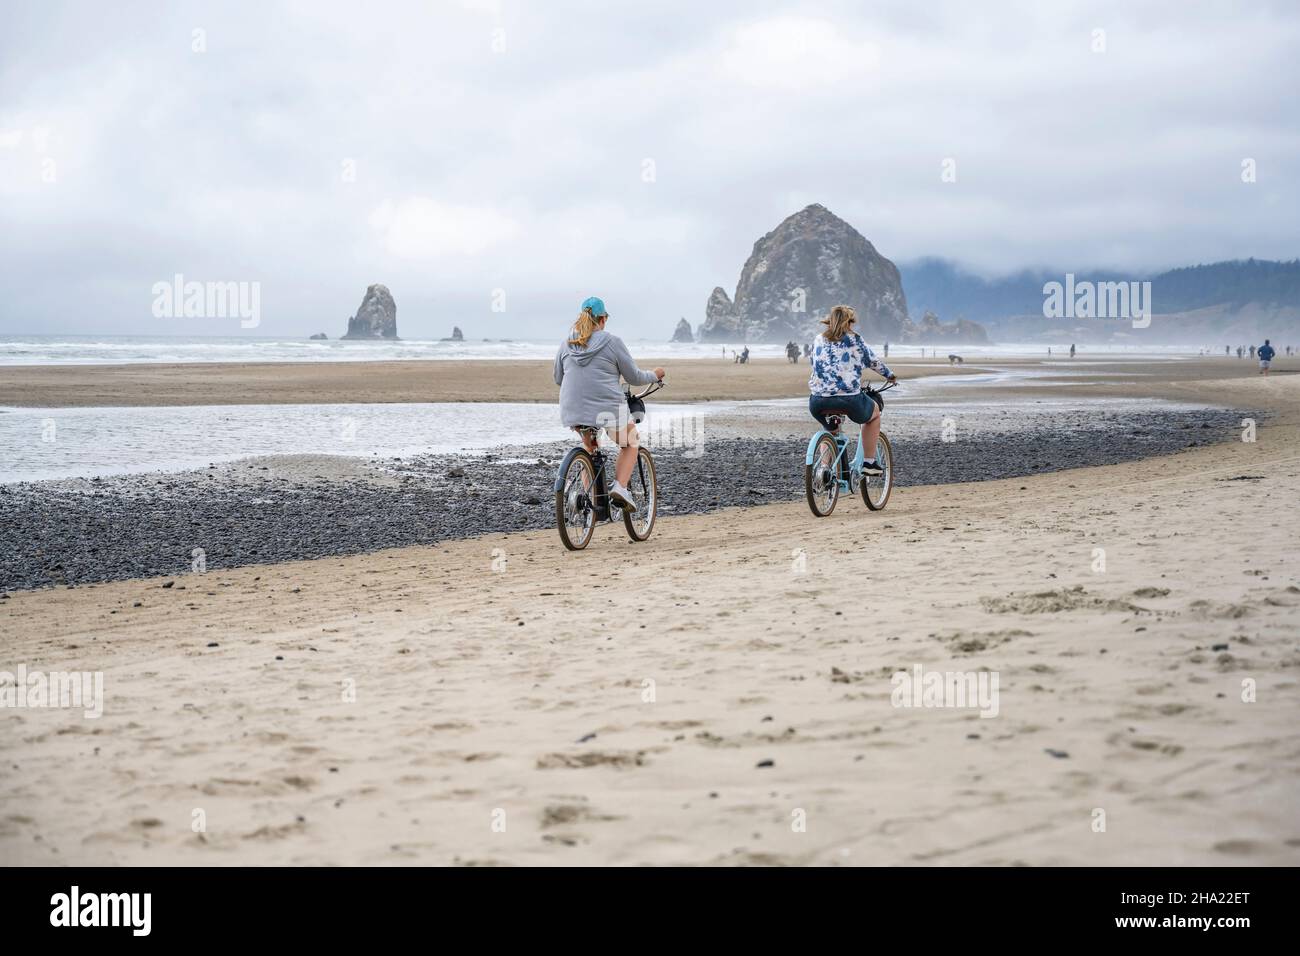 Two middle-aged women amateur cyclists rides bicycles traveling on the cost line along the Northwest Pacific Ocean preferring an active healthy lifest Stock Photo